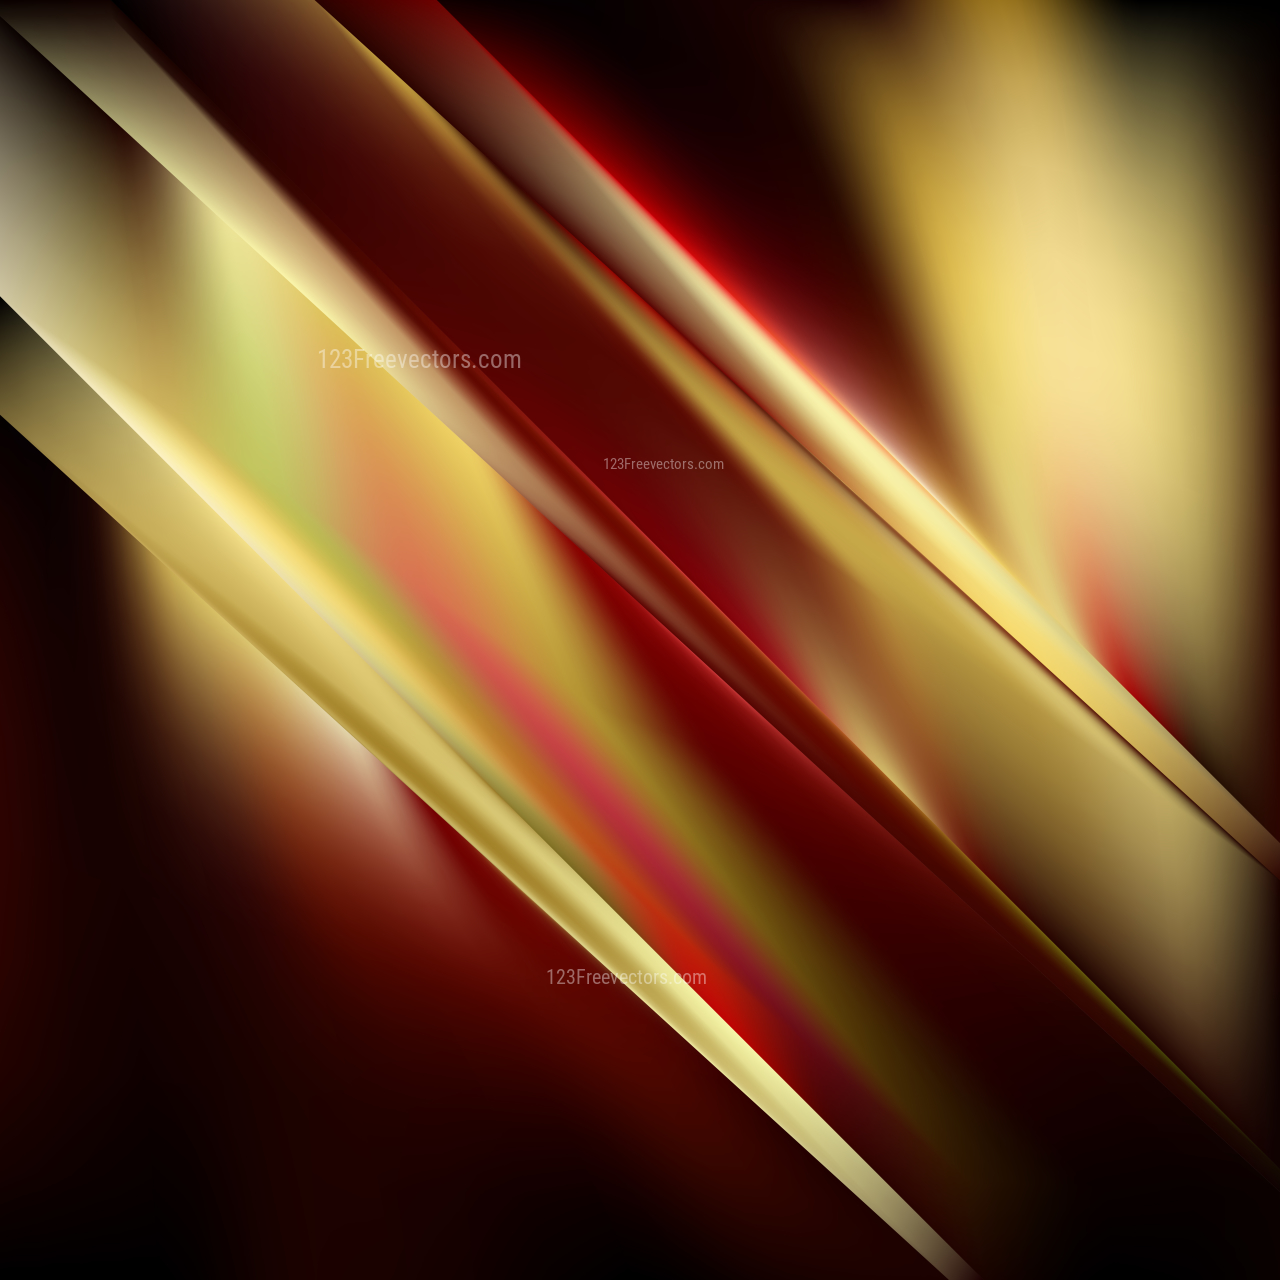 Black Red and Gold Background Vector Image